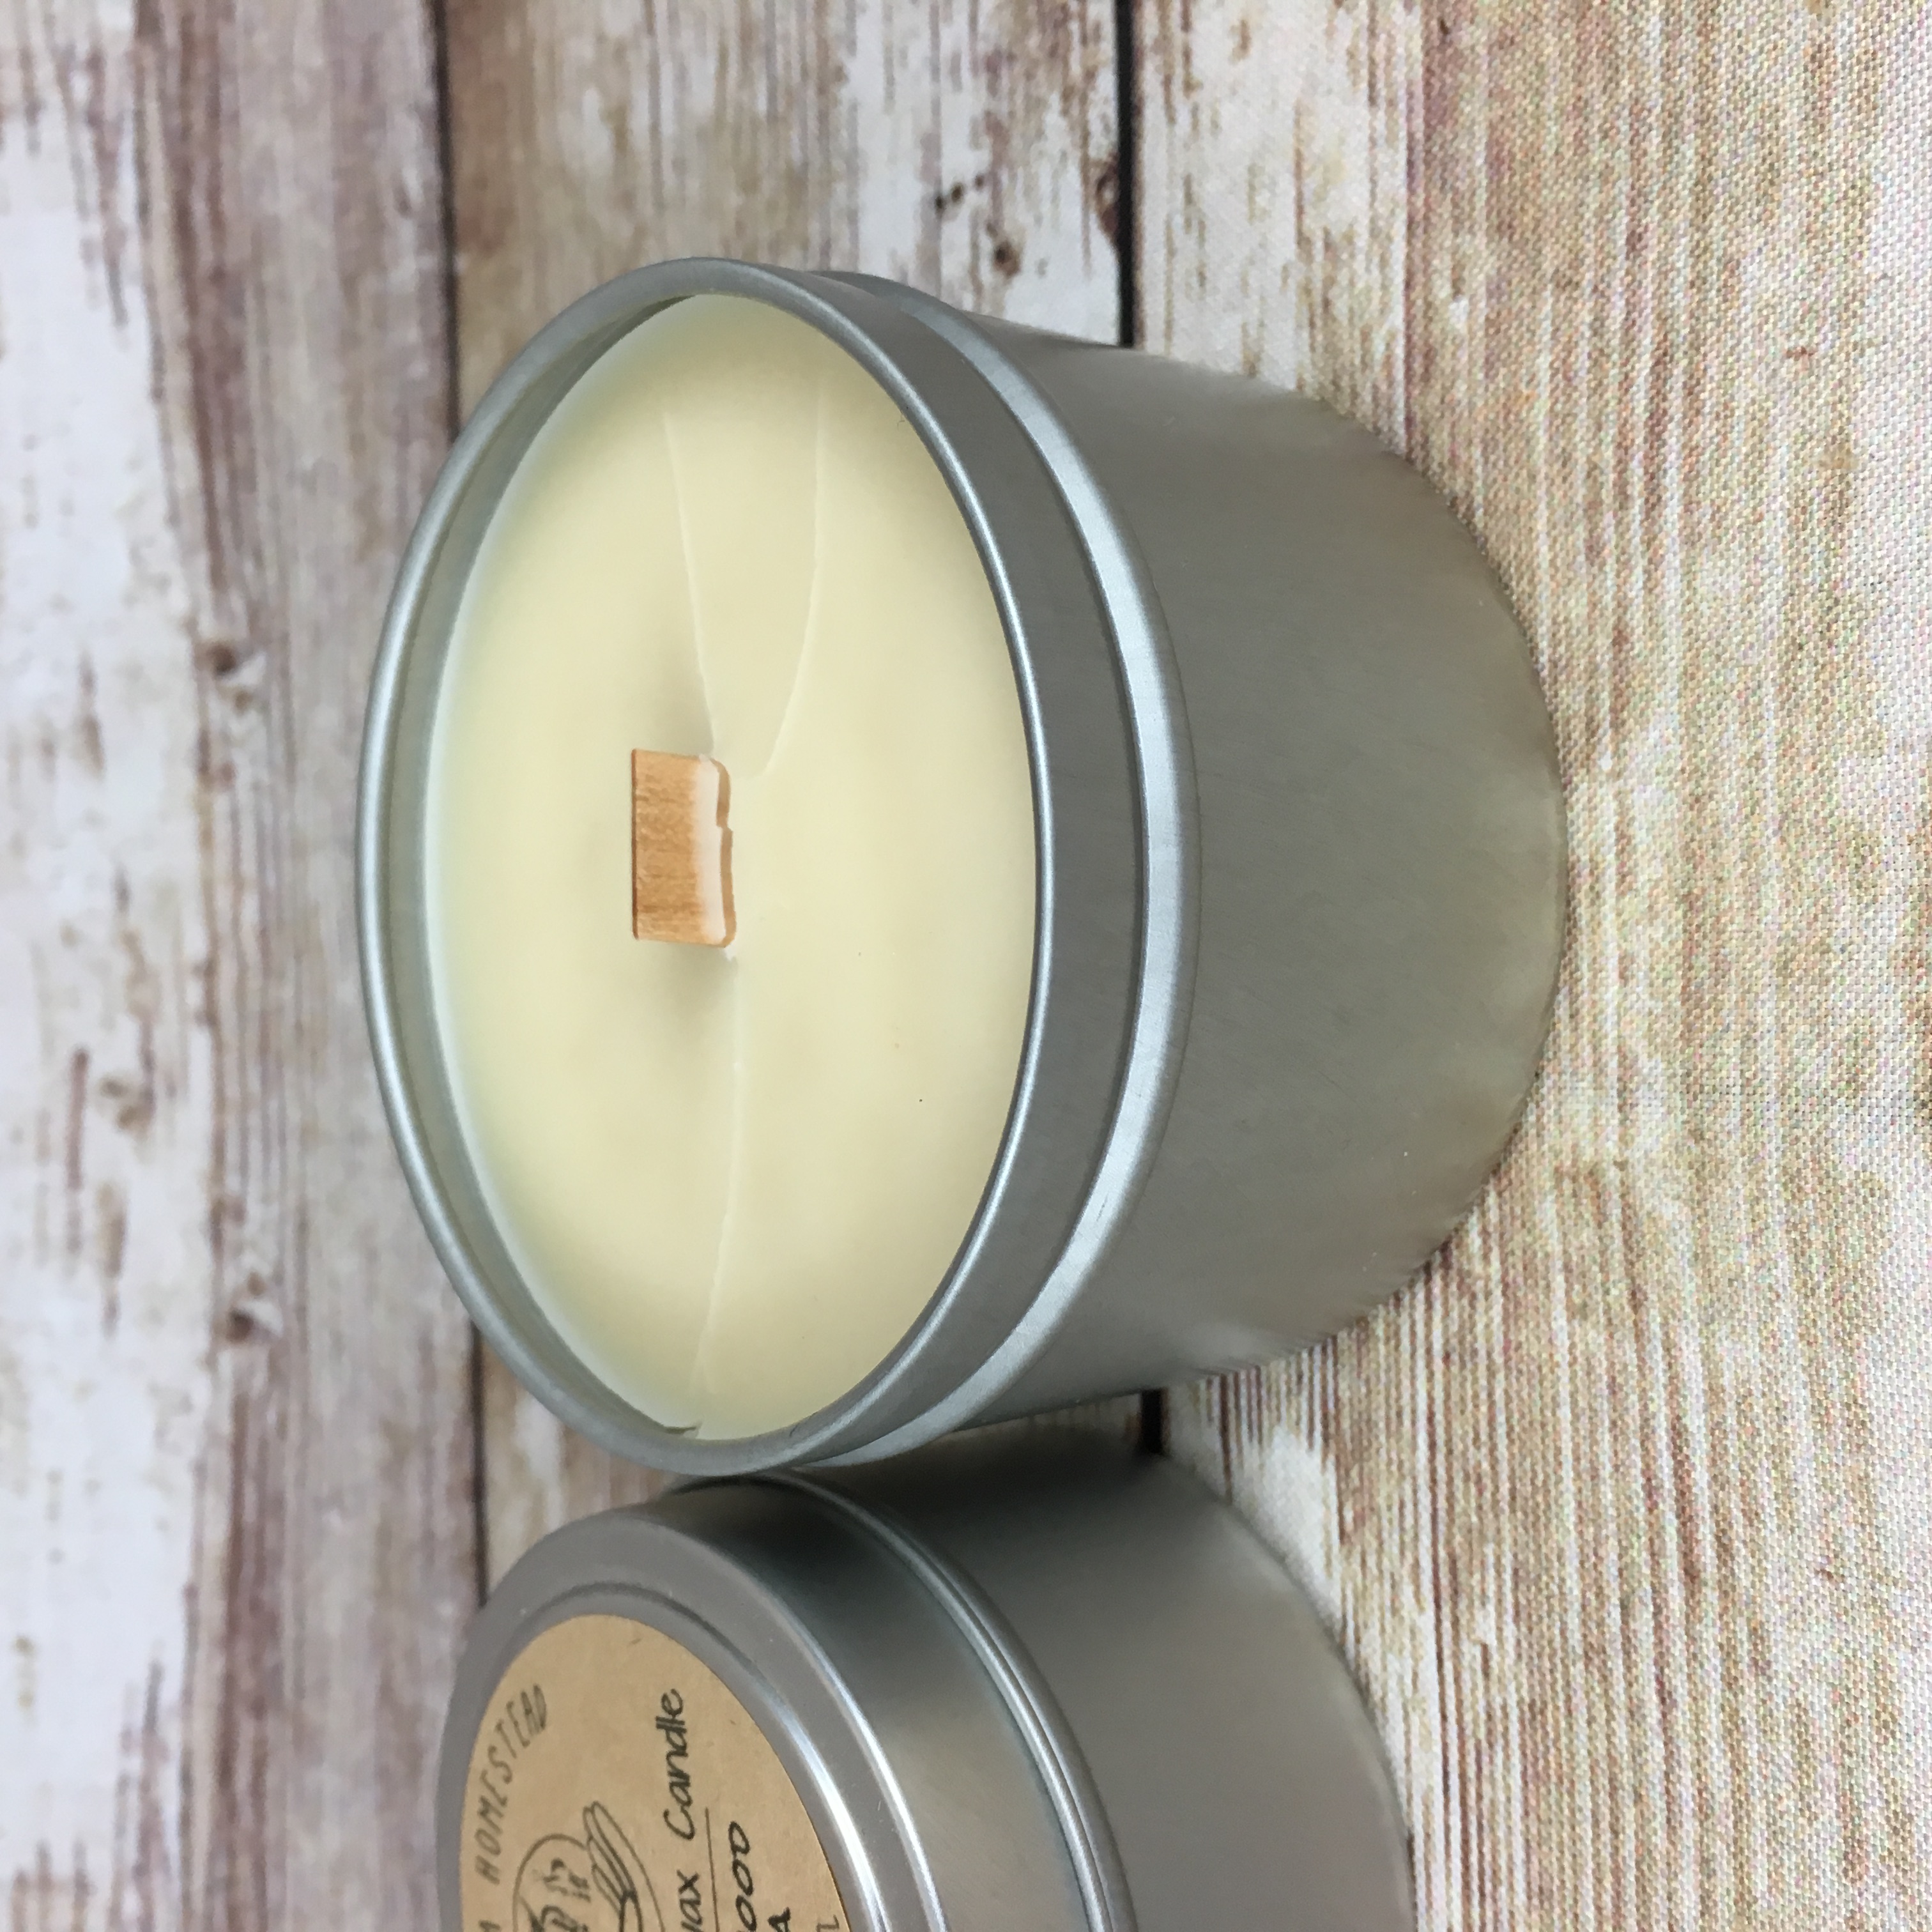 Chamomile Tea - Hand poured organic soy wax melts and wood wick candles